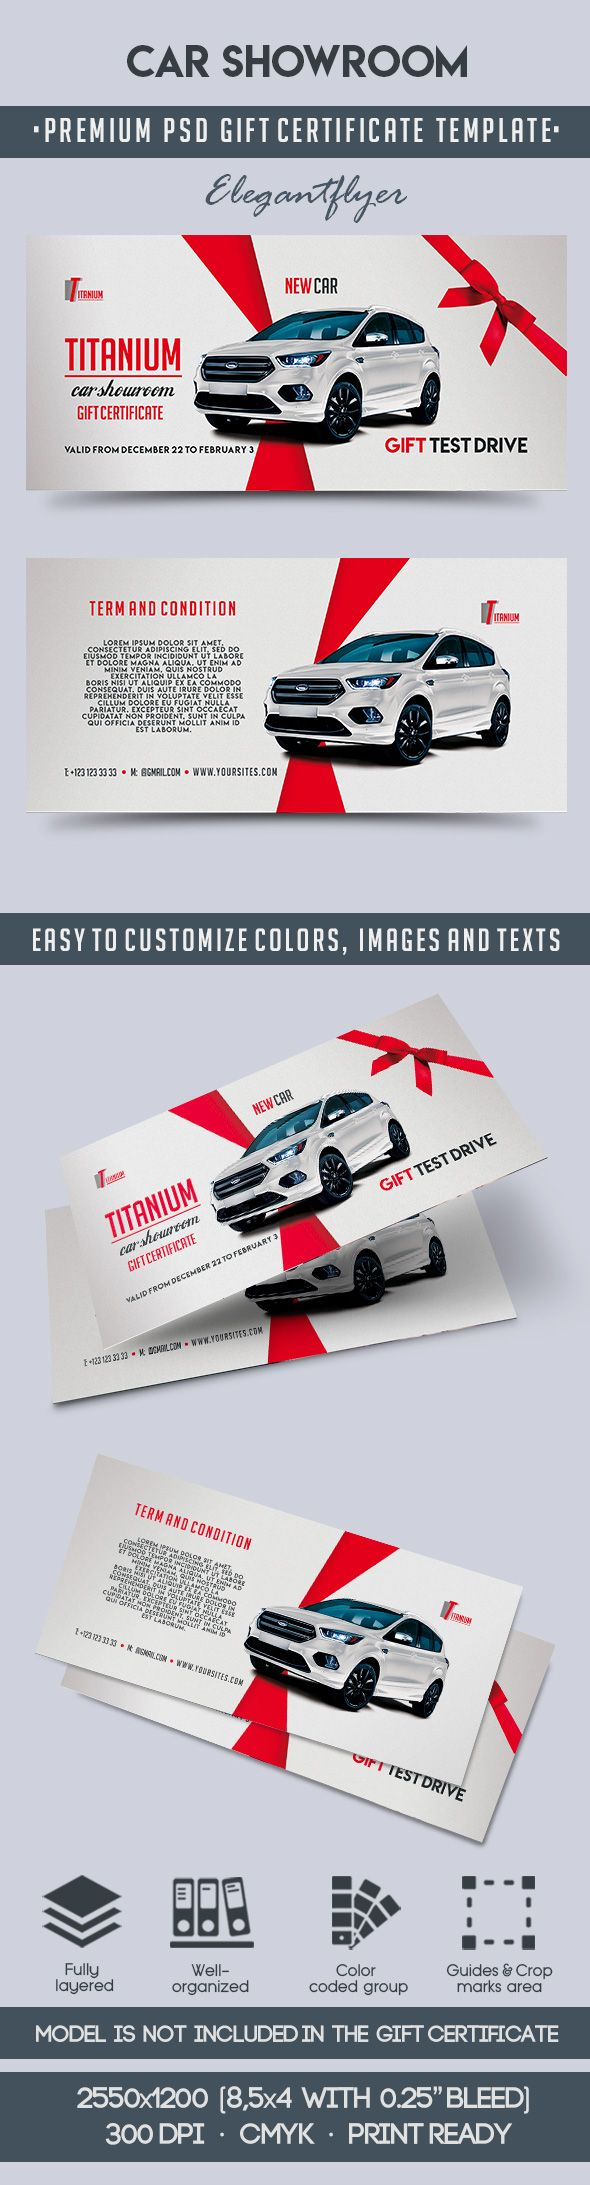 Car Showroom – Premium Gift Certificate PSD Template  by ElegantFlyer With Automotive Gift Certificate Template